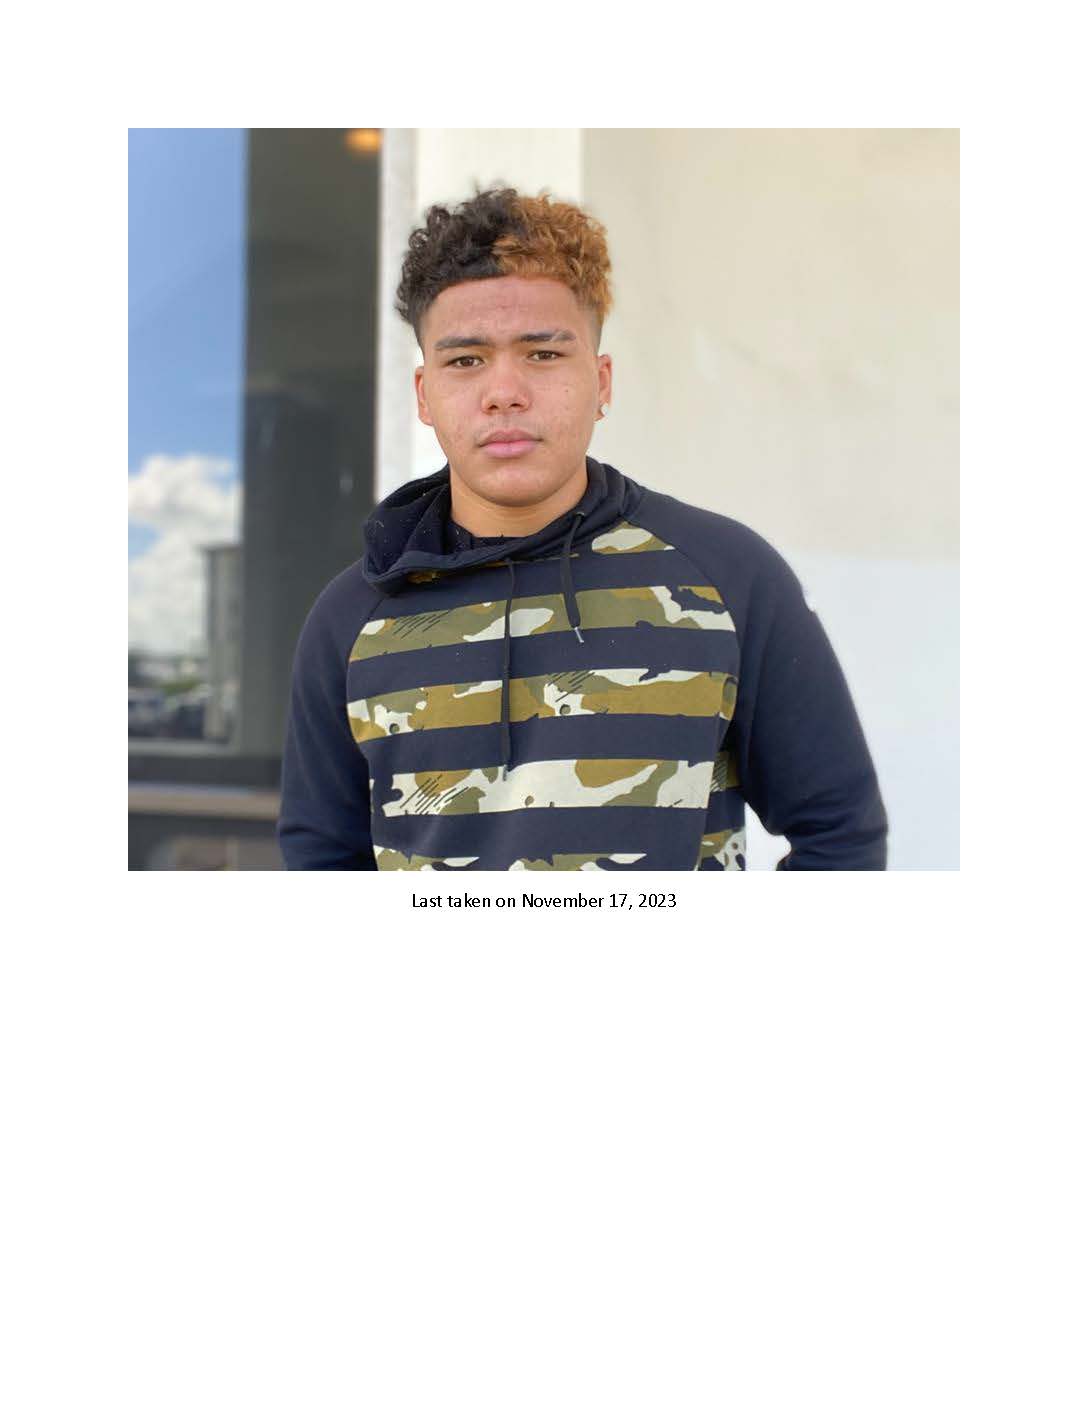 Missing Children: Kaimana Matakeohuloa, eyes color brown, hair color lightbrown/darkbrown, weight 140pounds, height 5feet 6inches, 